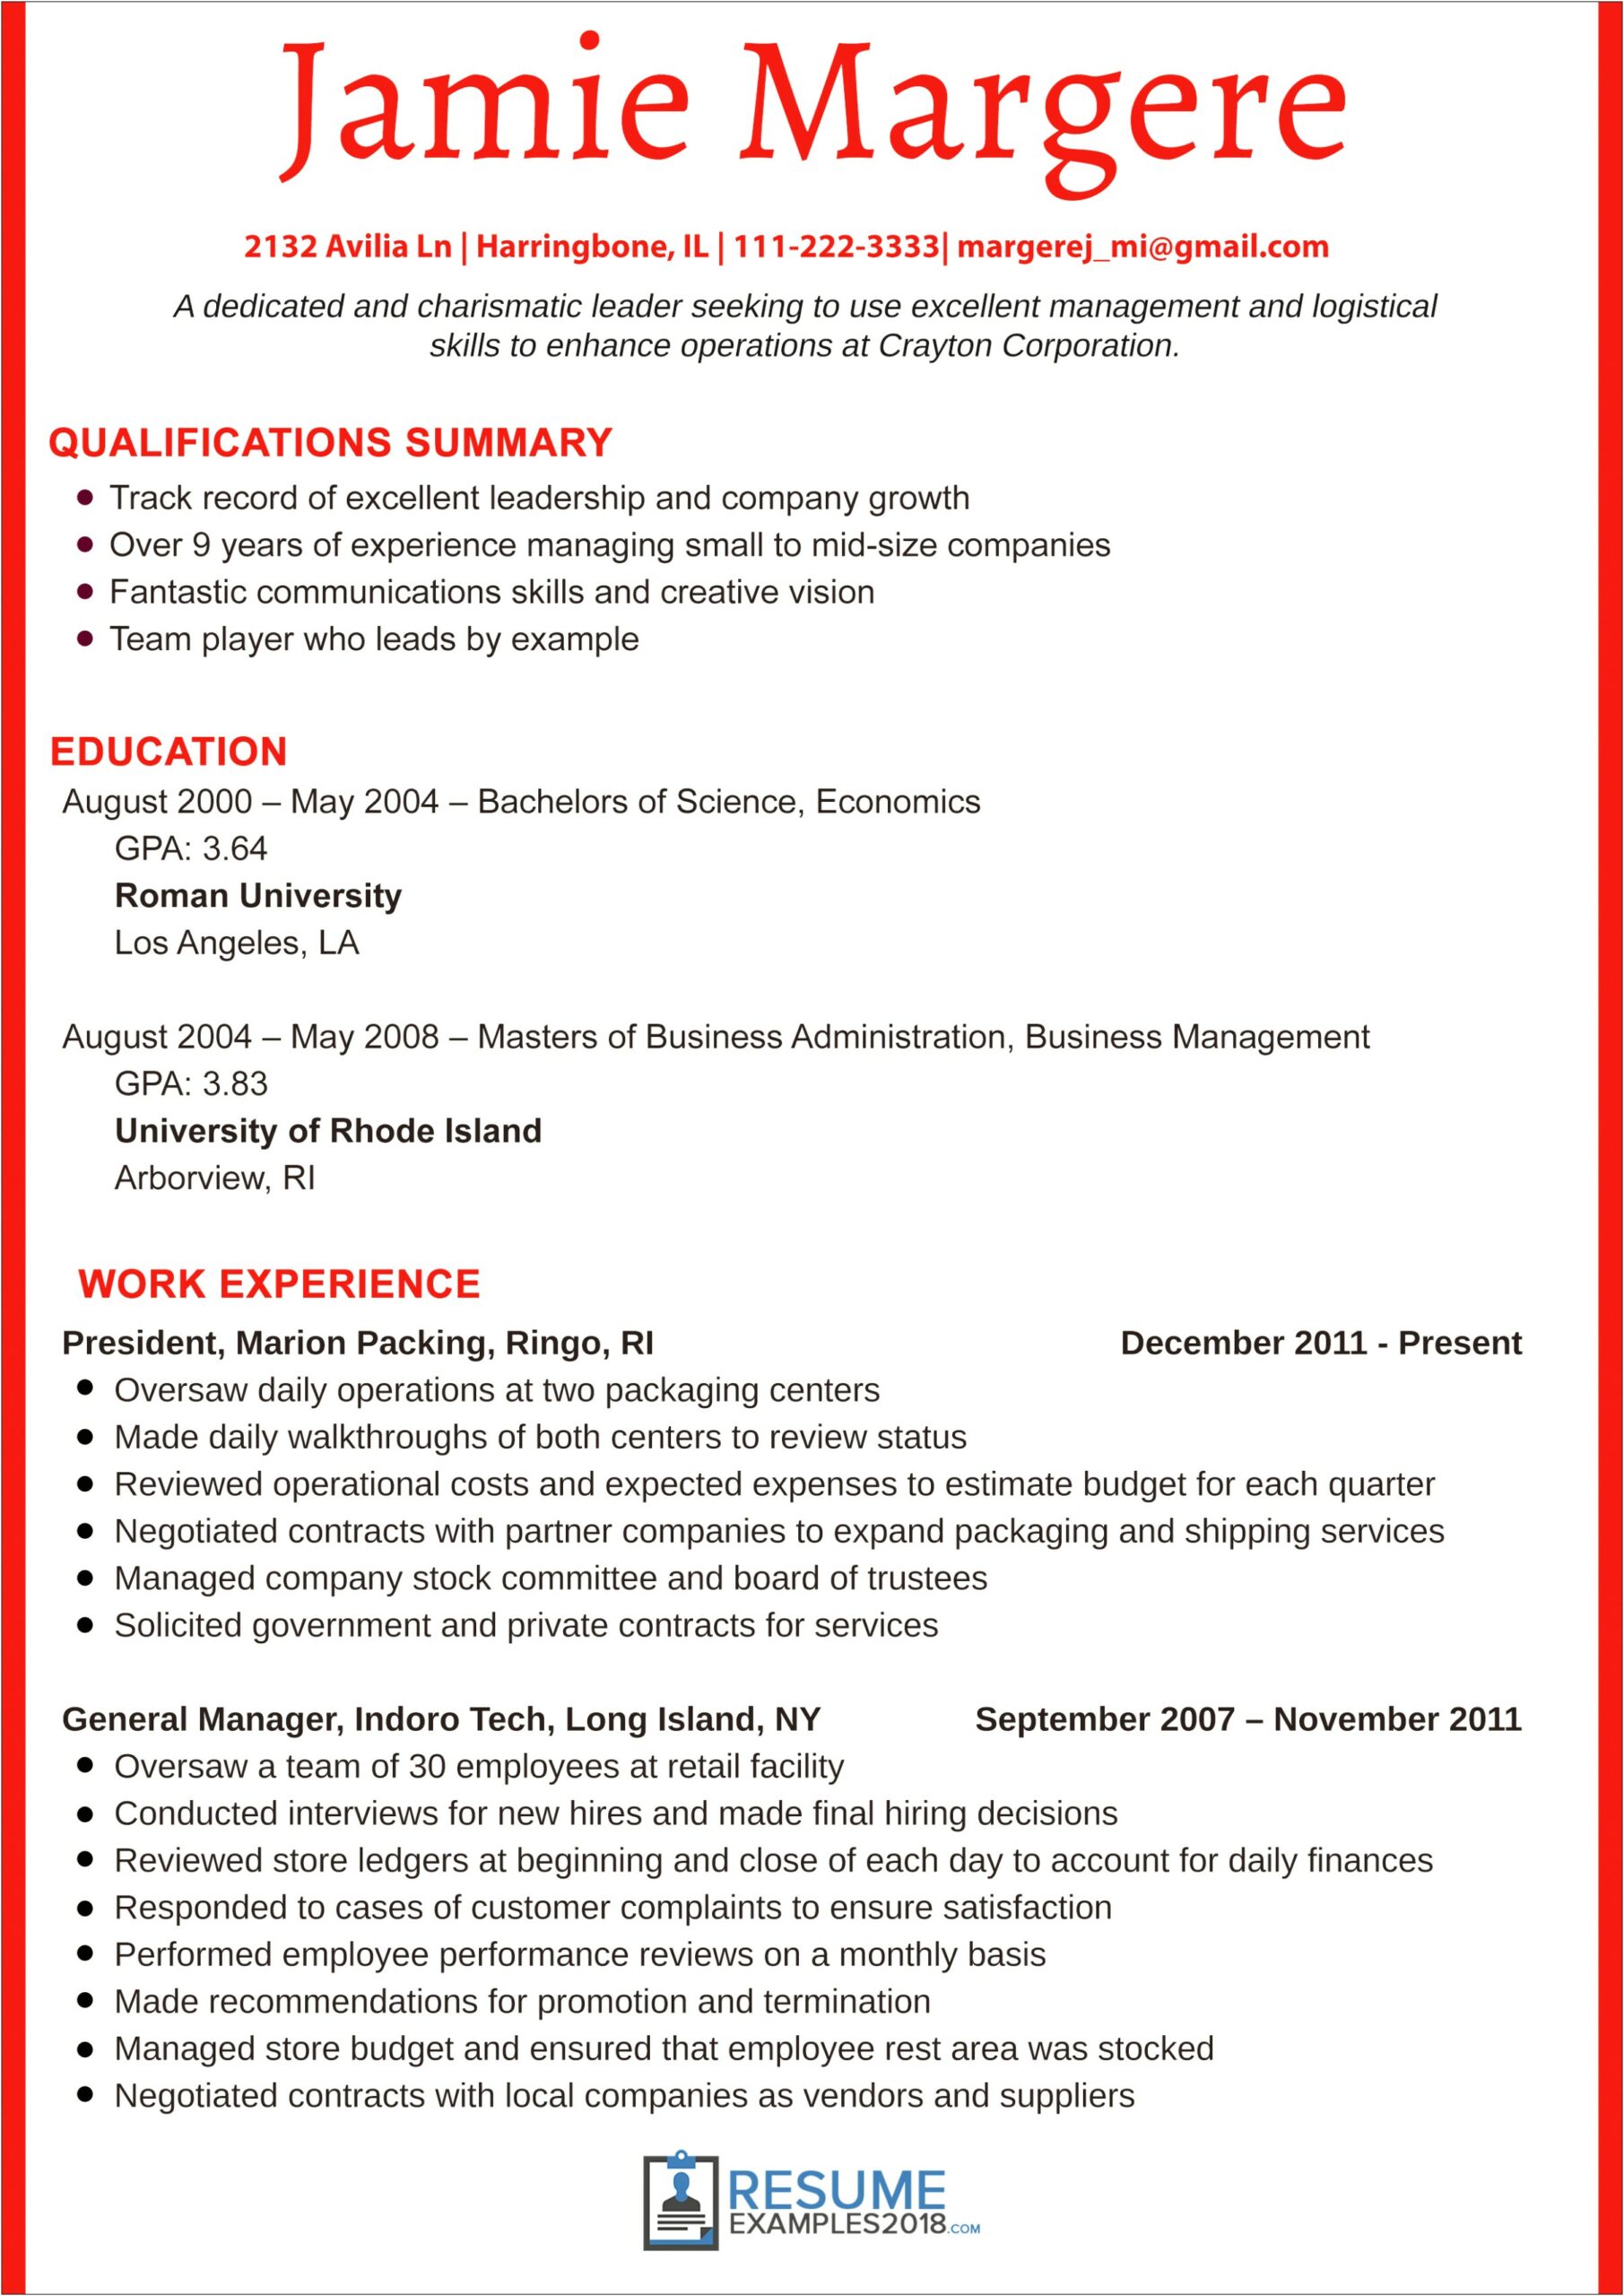 Resume Examples 2018 For Students